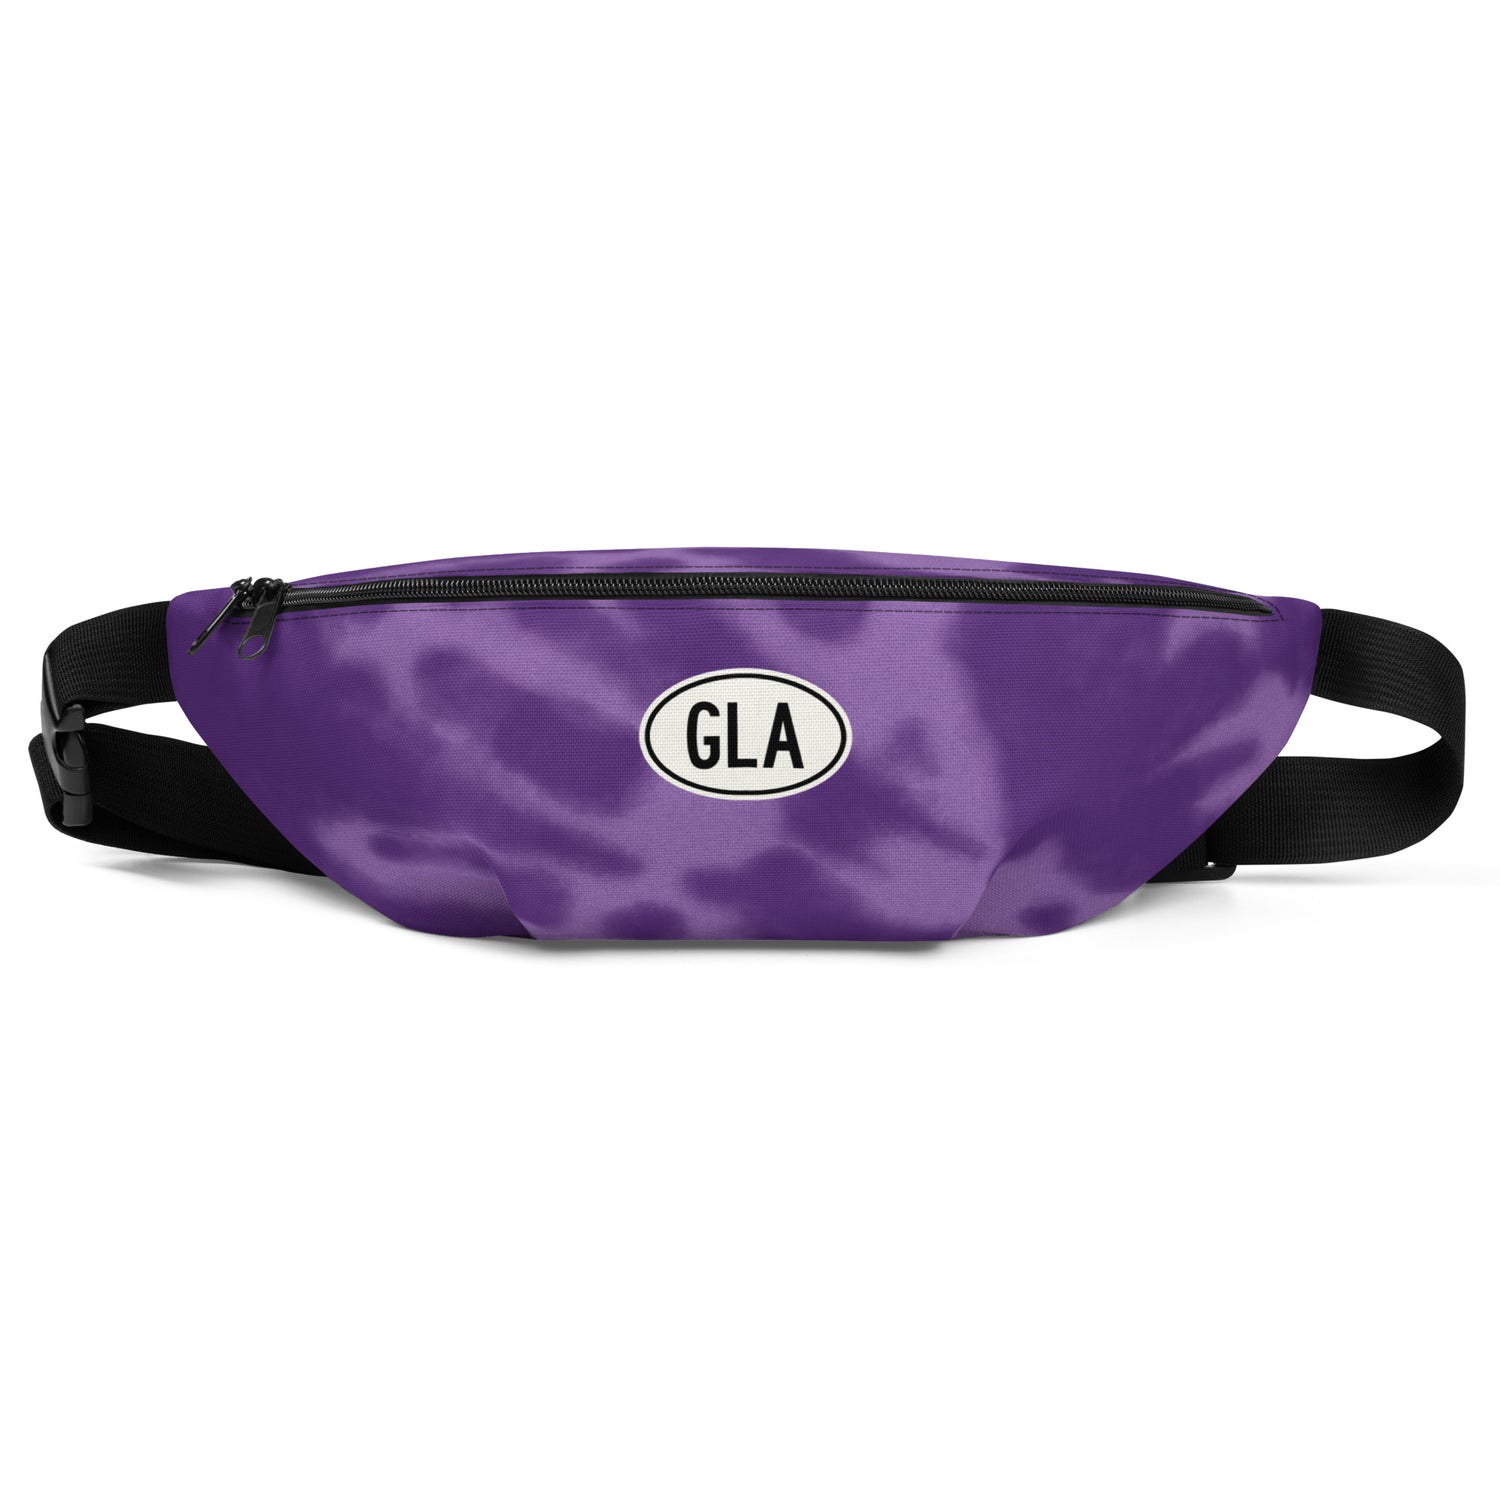 Glasgow Scotland Backpacks, Fanny Packs and Tote Bags • GLA Airport Code